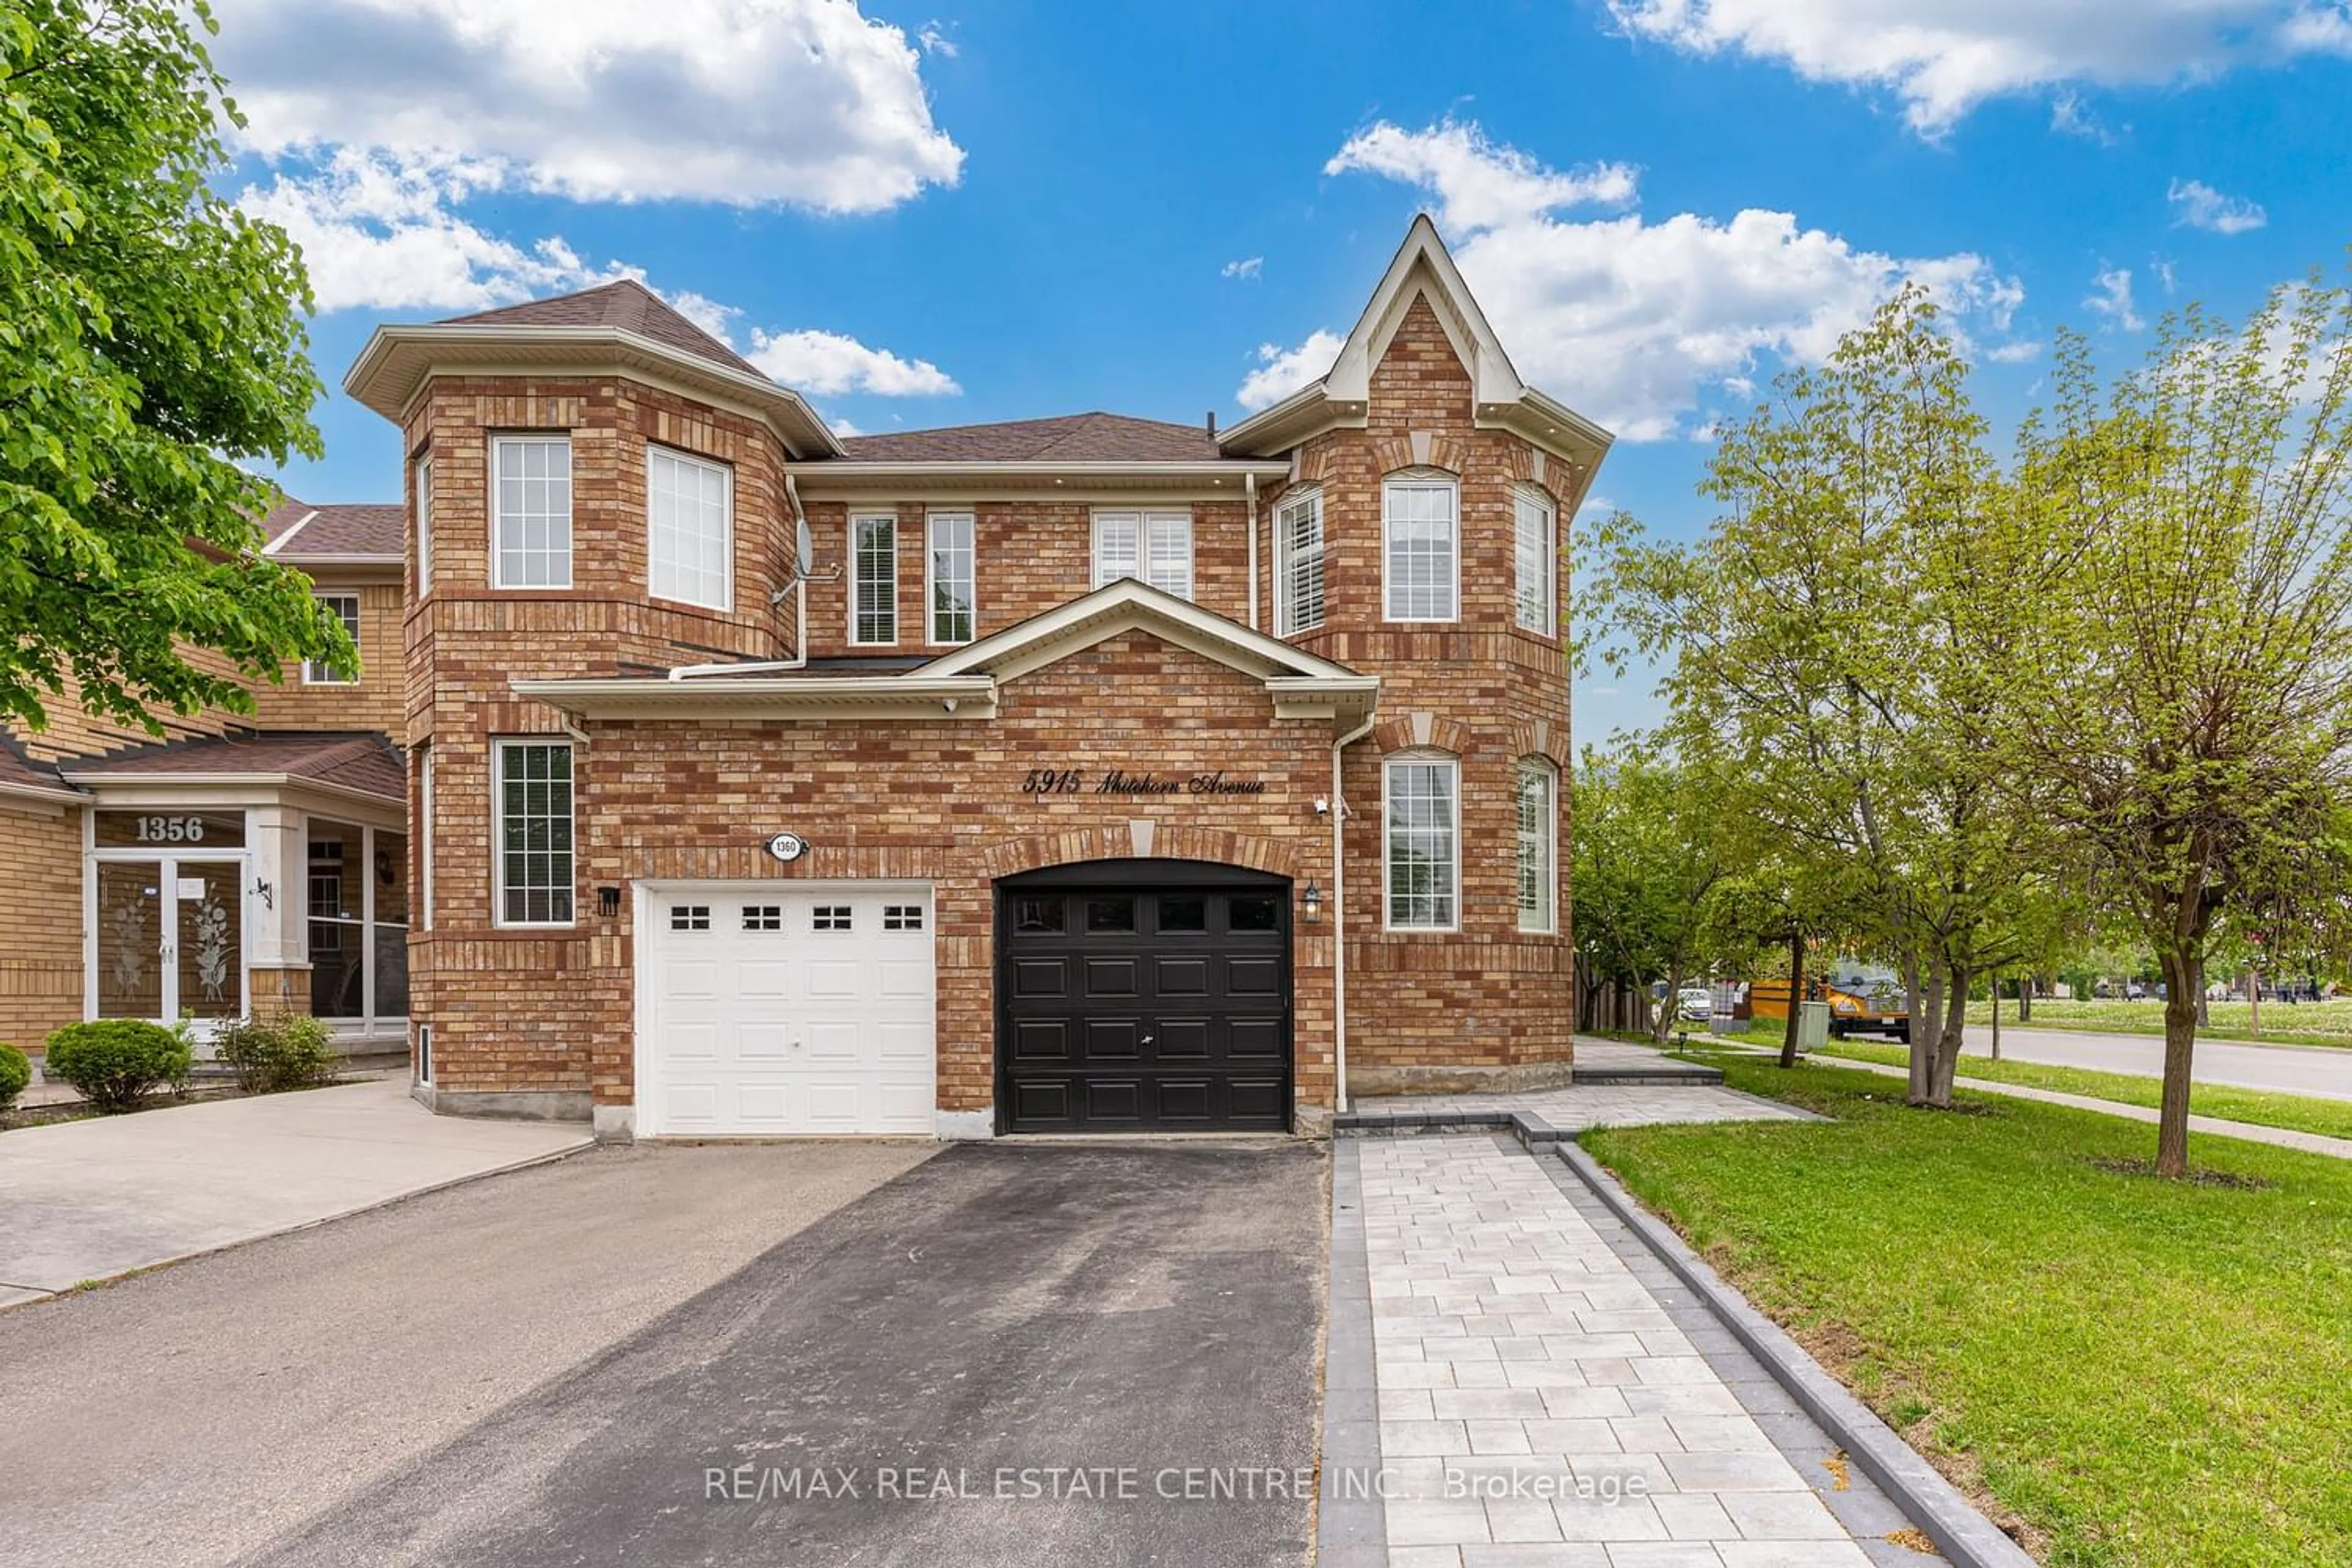 Home with brick exterior material for 5915 Whitehorn Ave, Mississauga Ontario L5V 2Z2